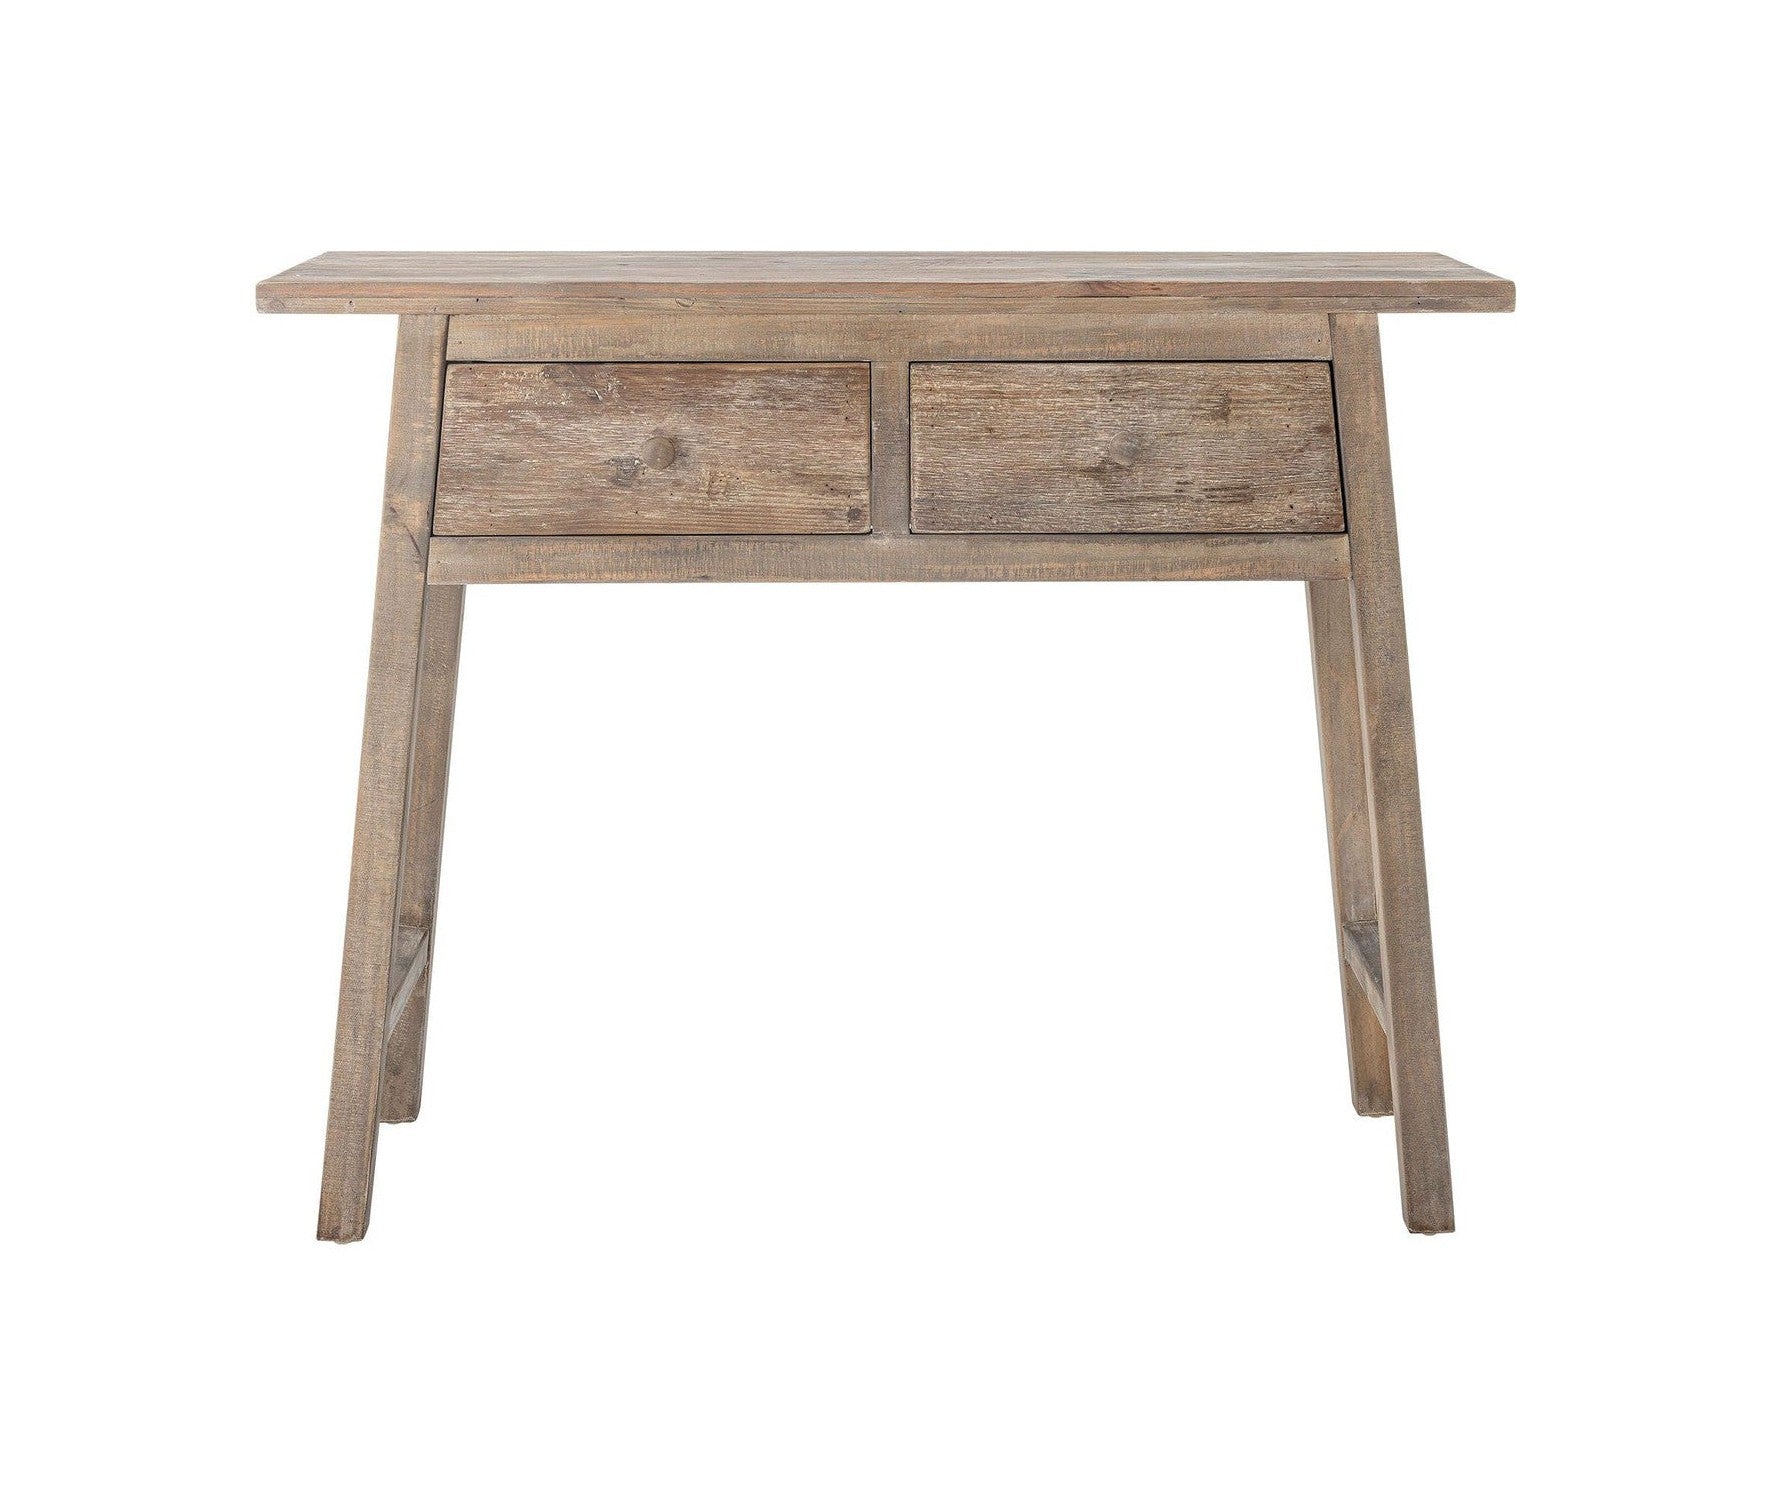 Creative Collection Camden Console Table, Nature, Reclaimed Pine Wood